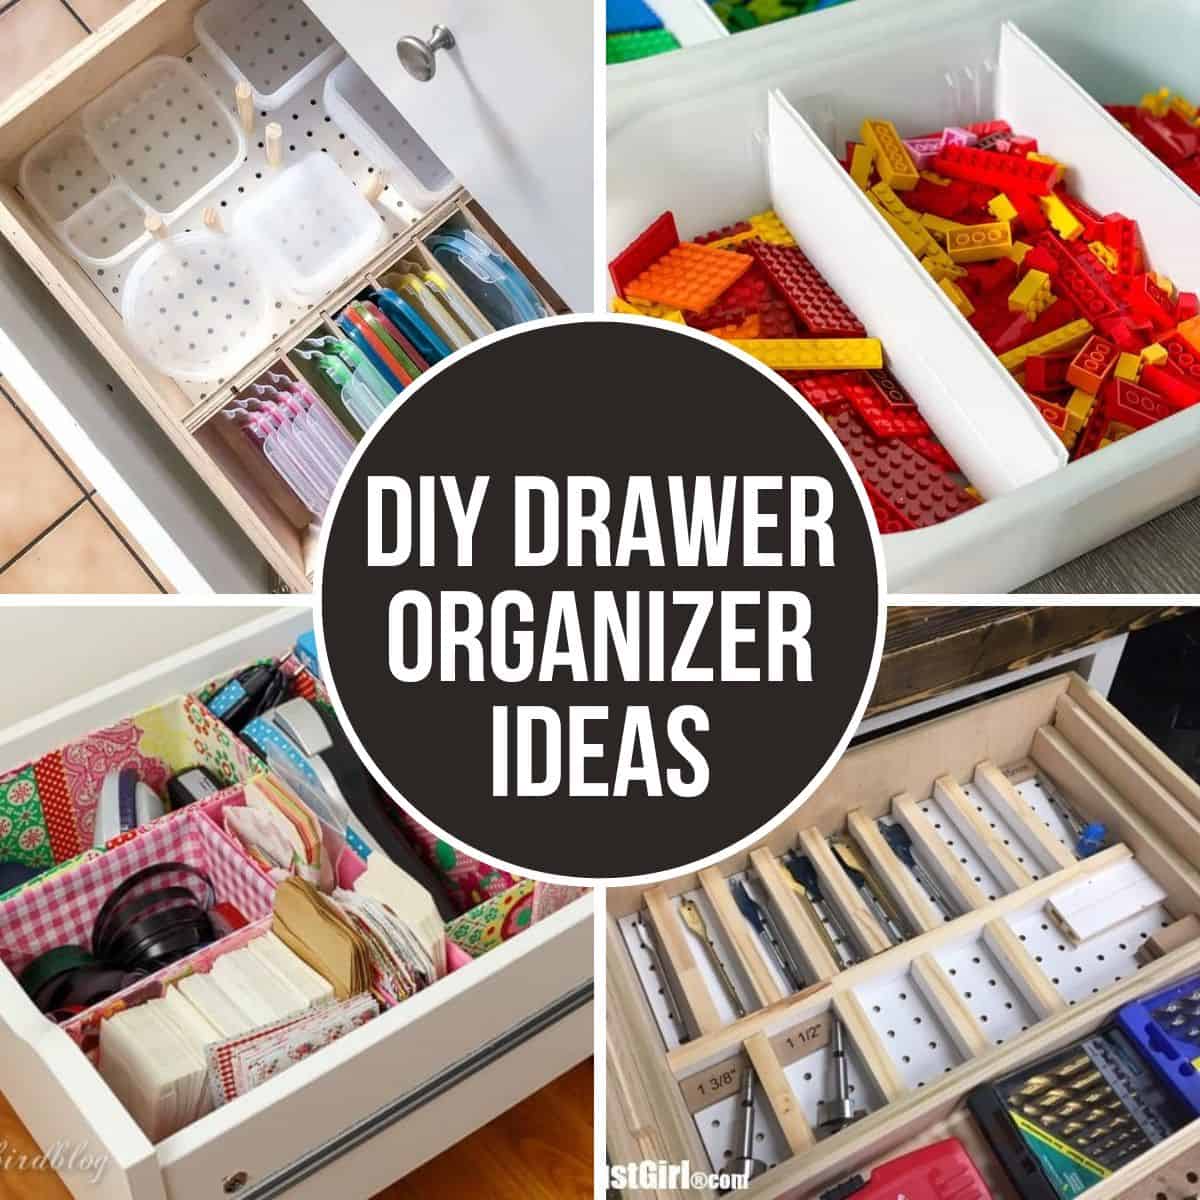 DIY Adjustable Drawer Dividers - DIY projects for everyone!